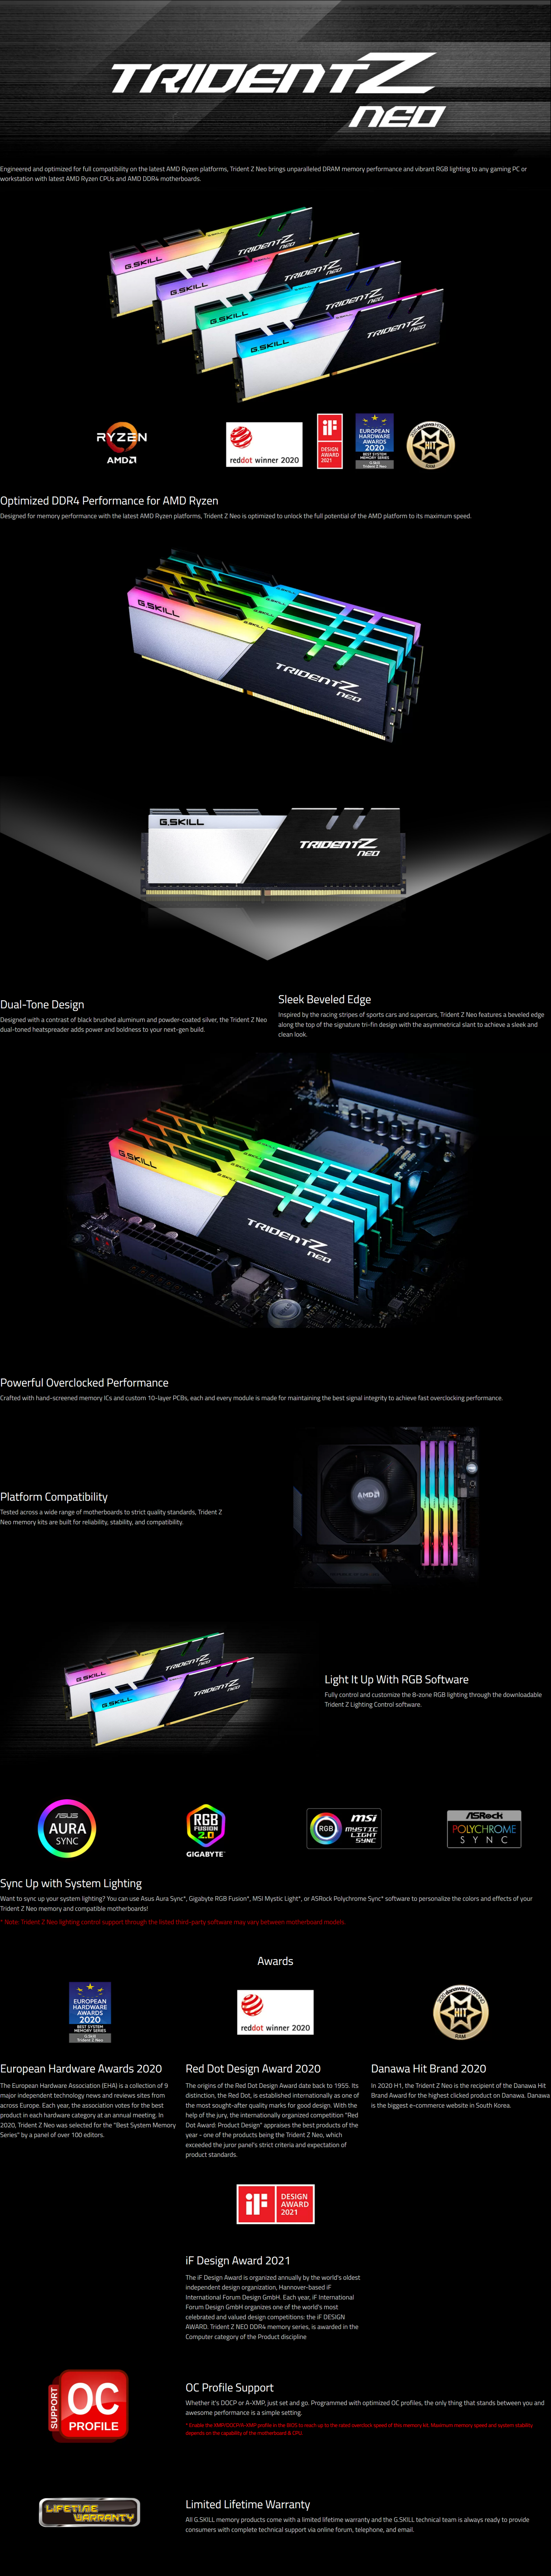 A large marketing image providing additional information about the product G.Skill 32GB Kit (2x16GB) DDR4 Trident Z RGB Neo C16 3200Mhz - Black - Additional alt info not provided